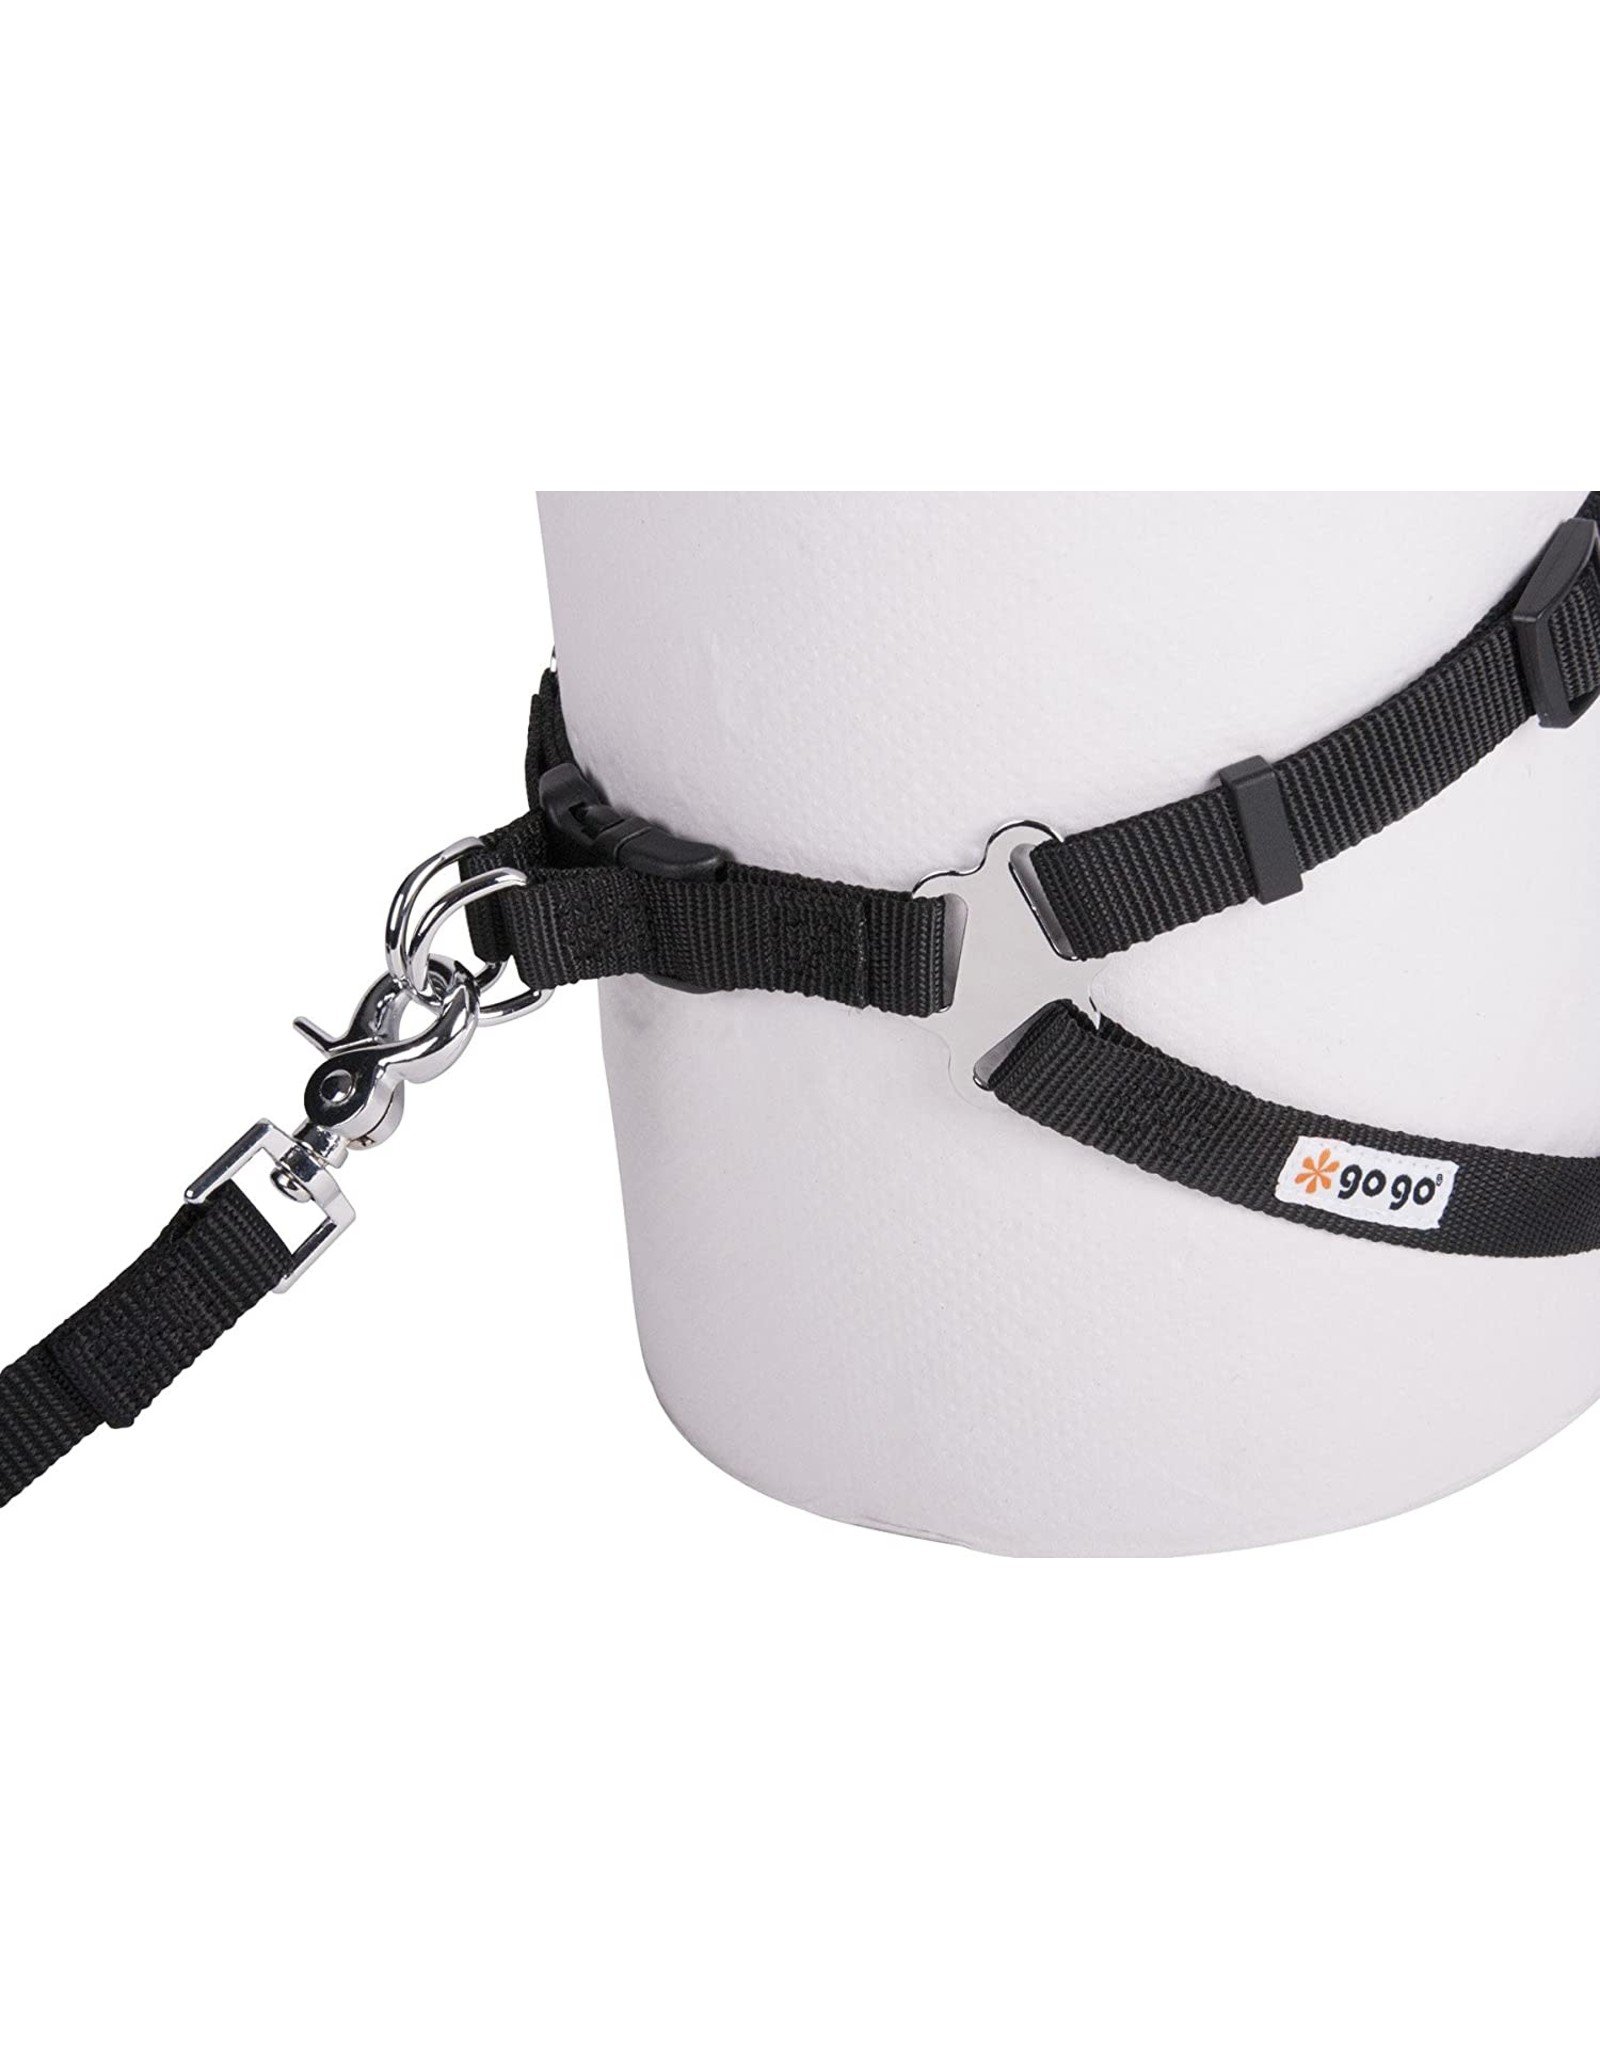 GoGo Pet Products GOGO BLACK NYLON COMFY HARNESS FOR DOGS